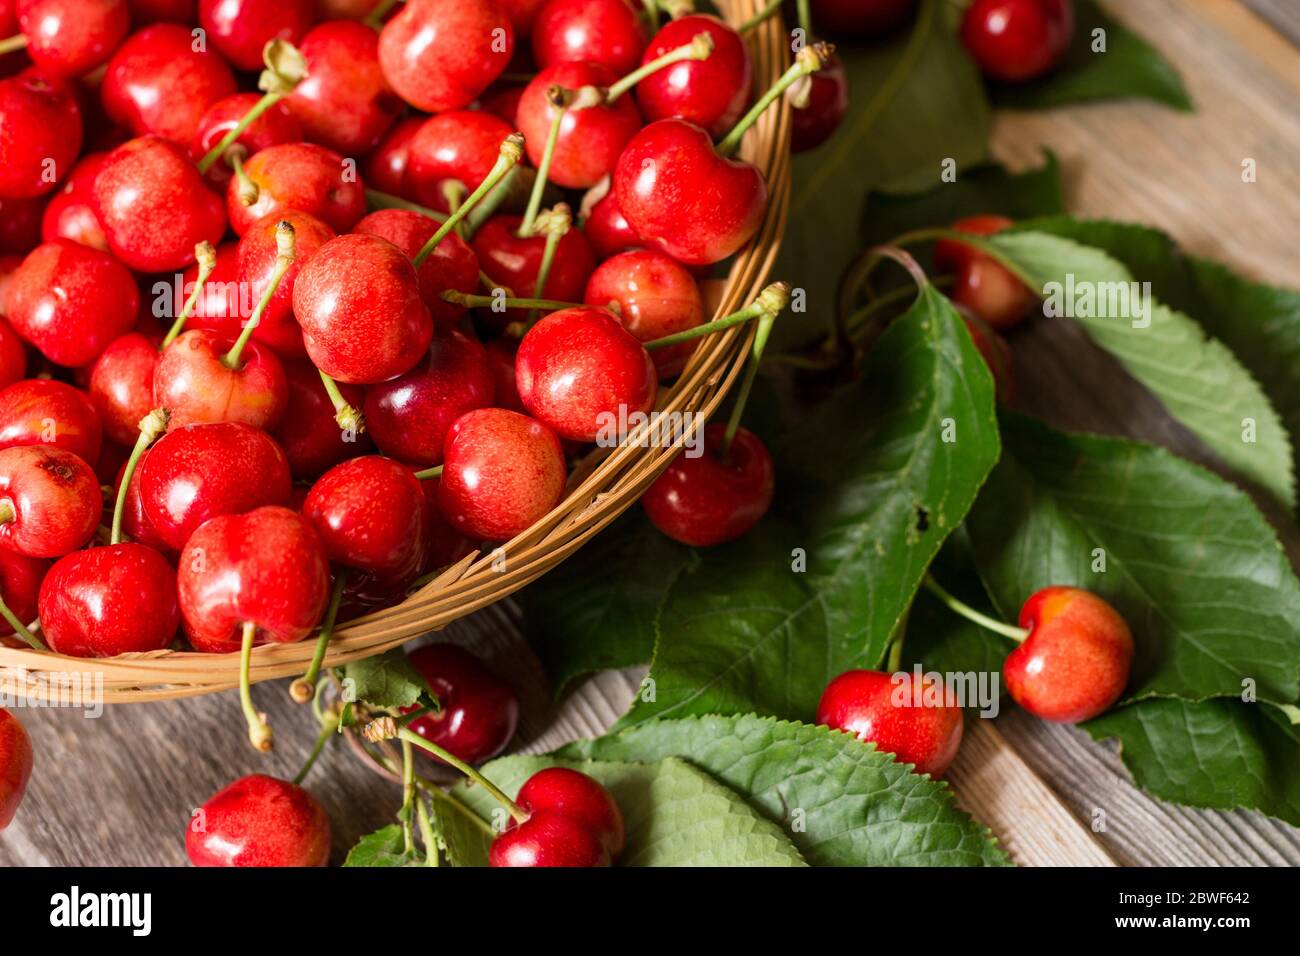 Basket of sweet and ripe cherries with leaves on wooden background Stock Photo